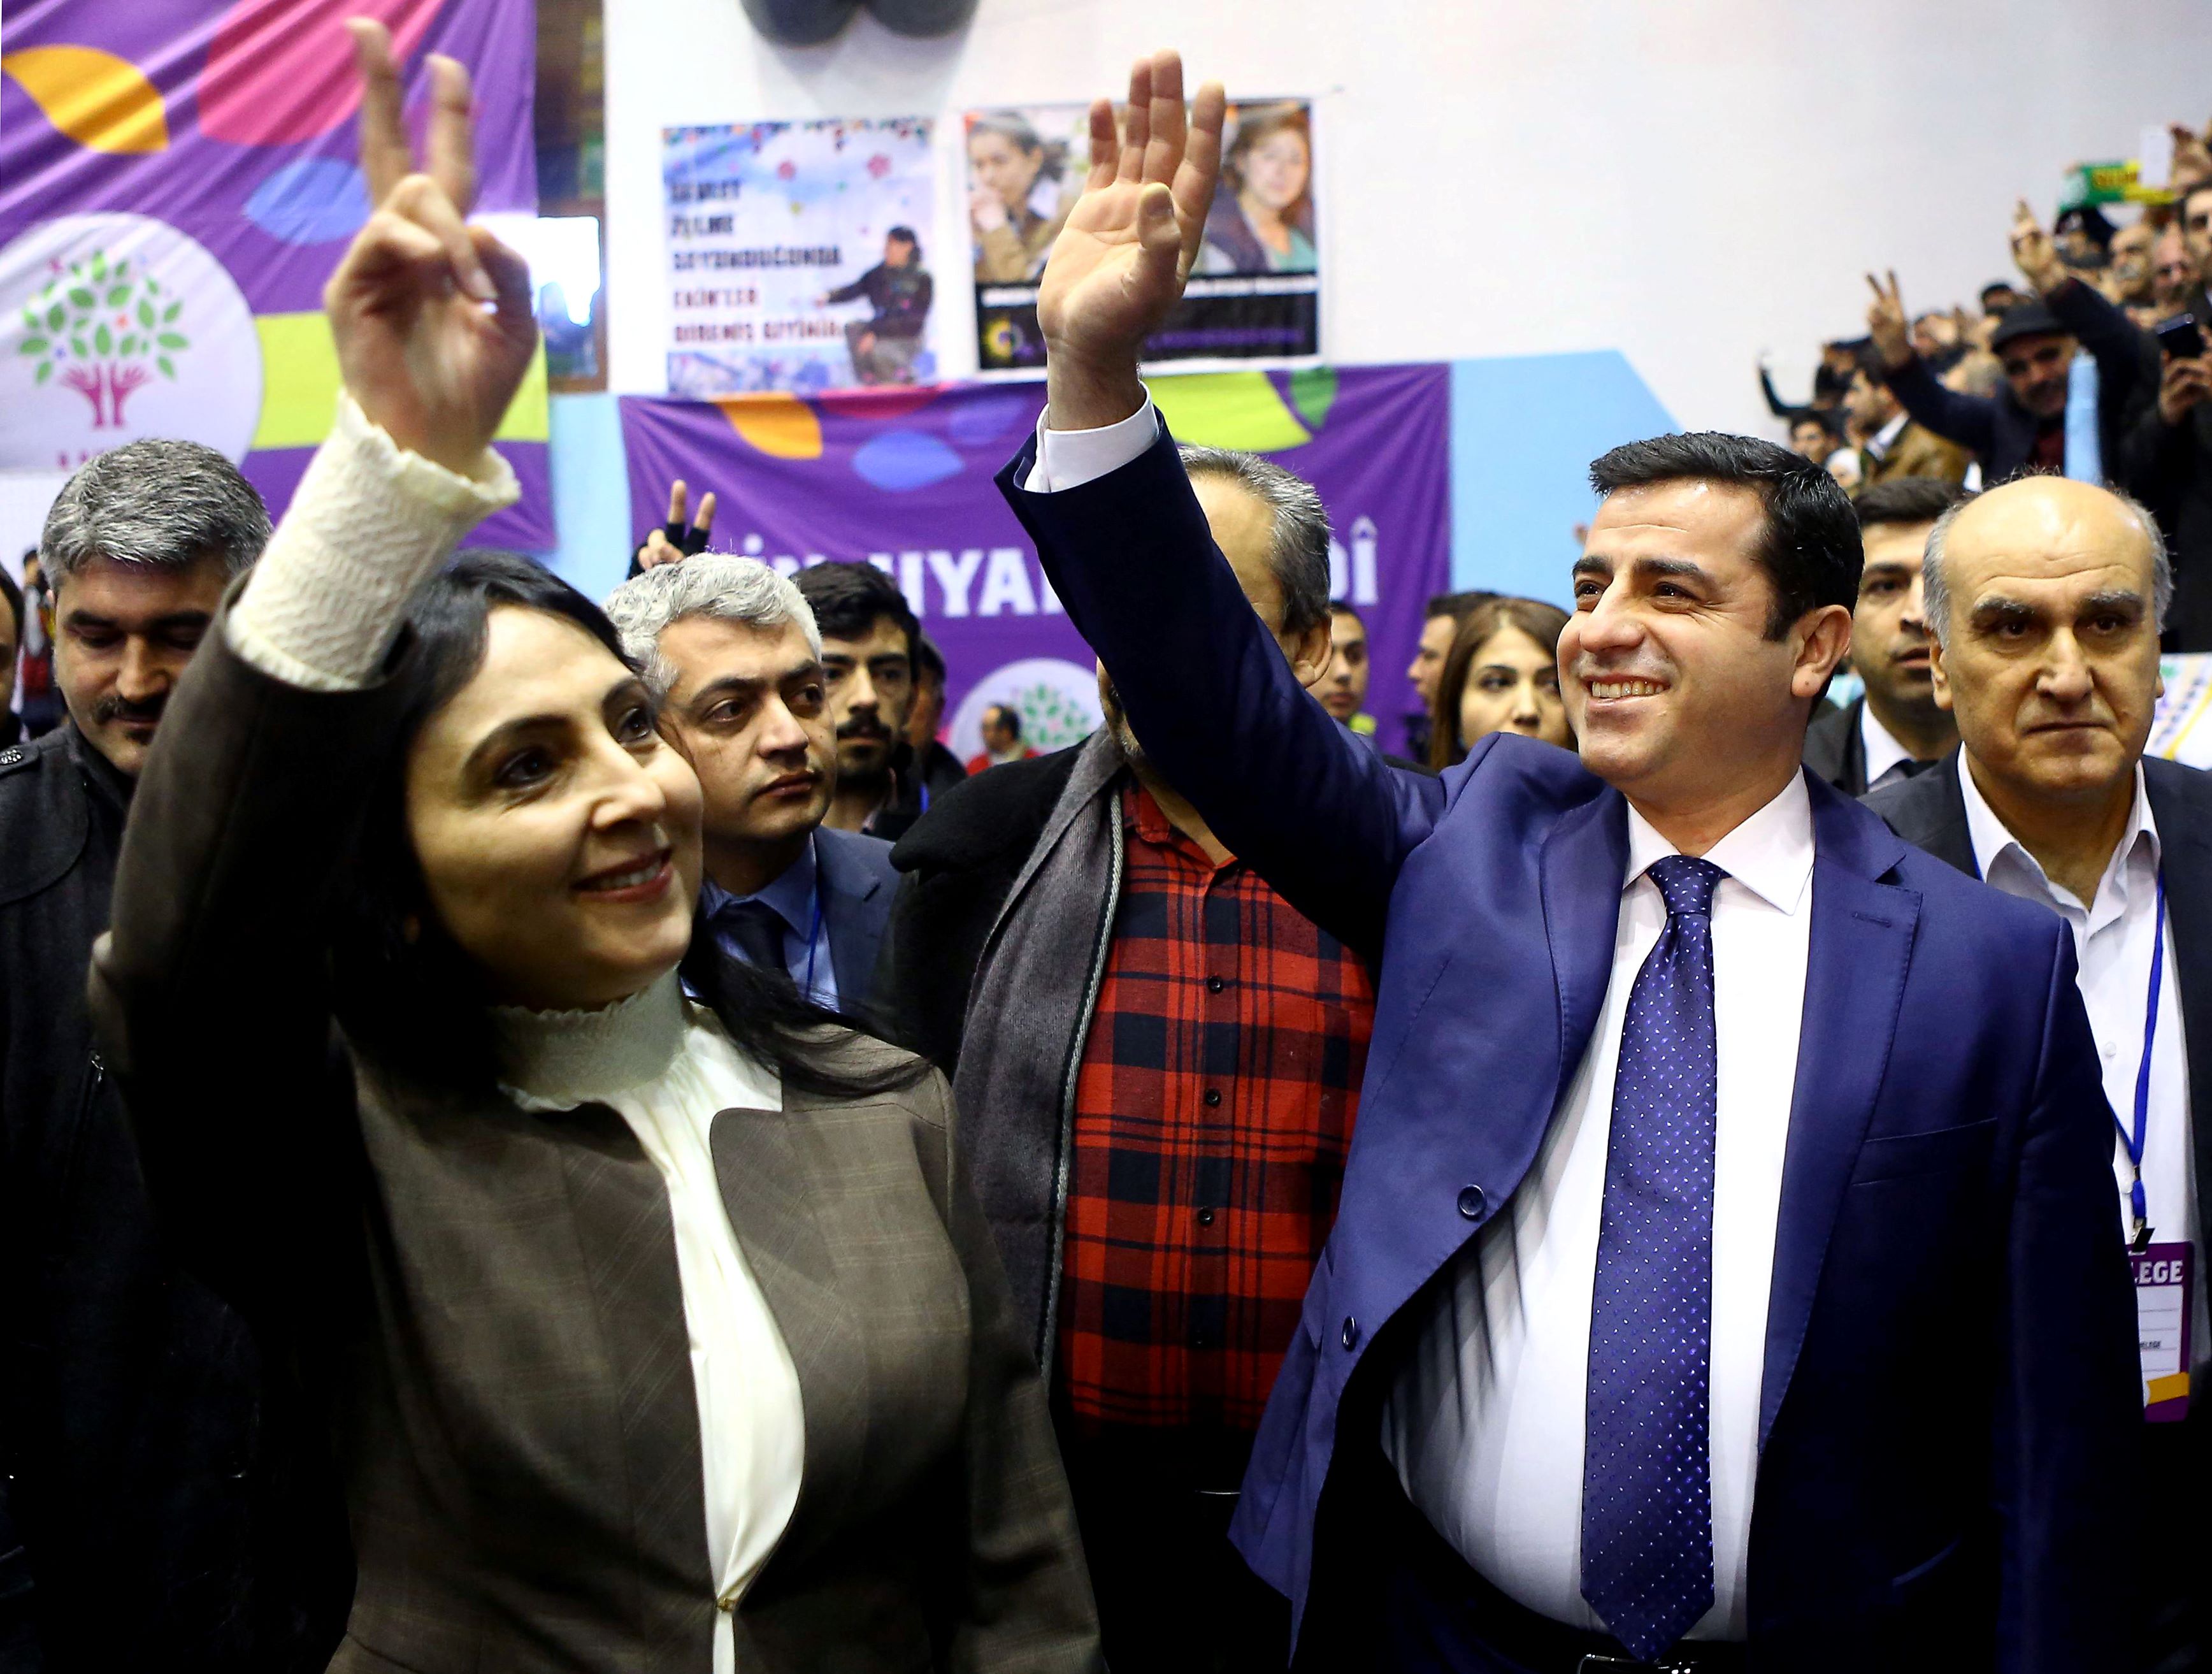 Co-leaders of the pro-Kurdish Peoples' Democratic Party (HDP) Selahattin Demirtas (R) and Figen Yuksekdag (L) wave as they attend the second general assembly in 2015 (AFP)